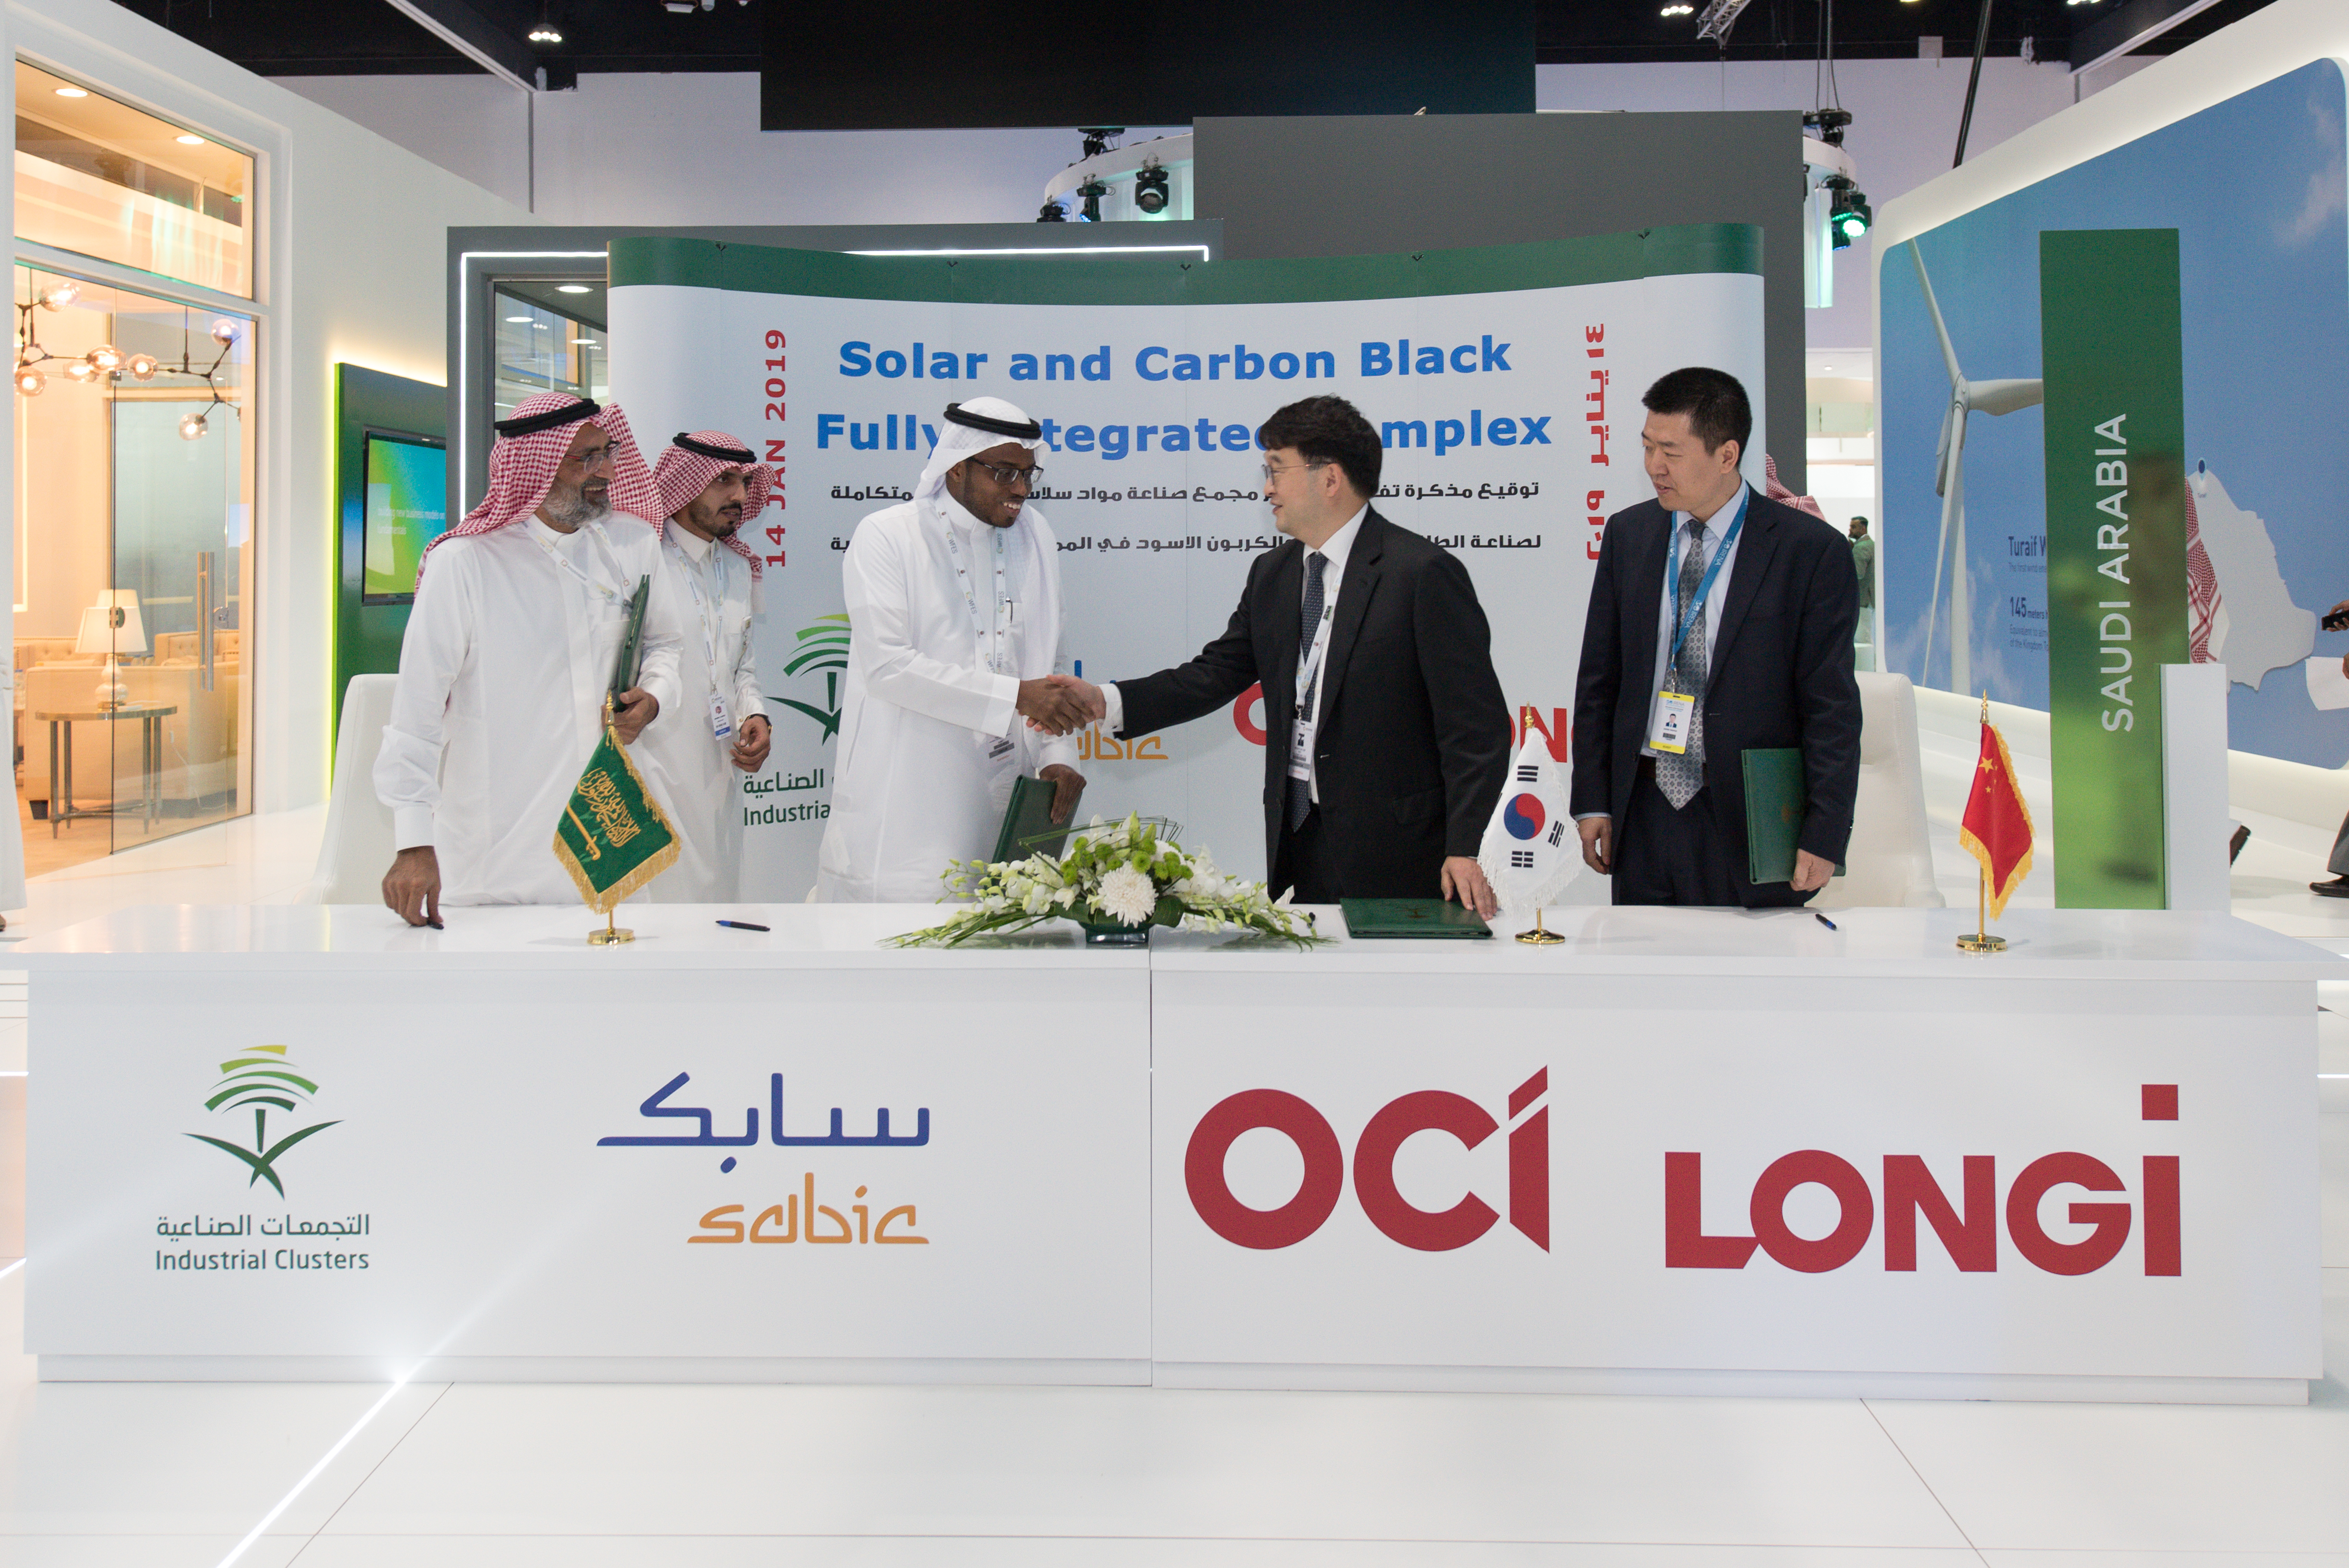 Materials company Sabic says that it is highlighting technologies that help address sustainability challenges as part of Abu Dhabi Sustainability Week (ADSW) 2019.